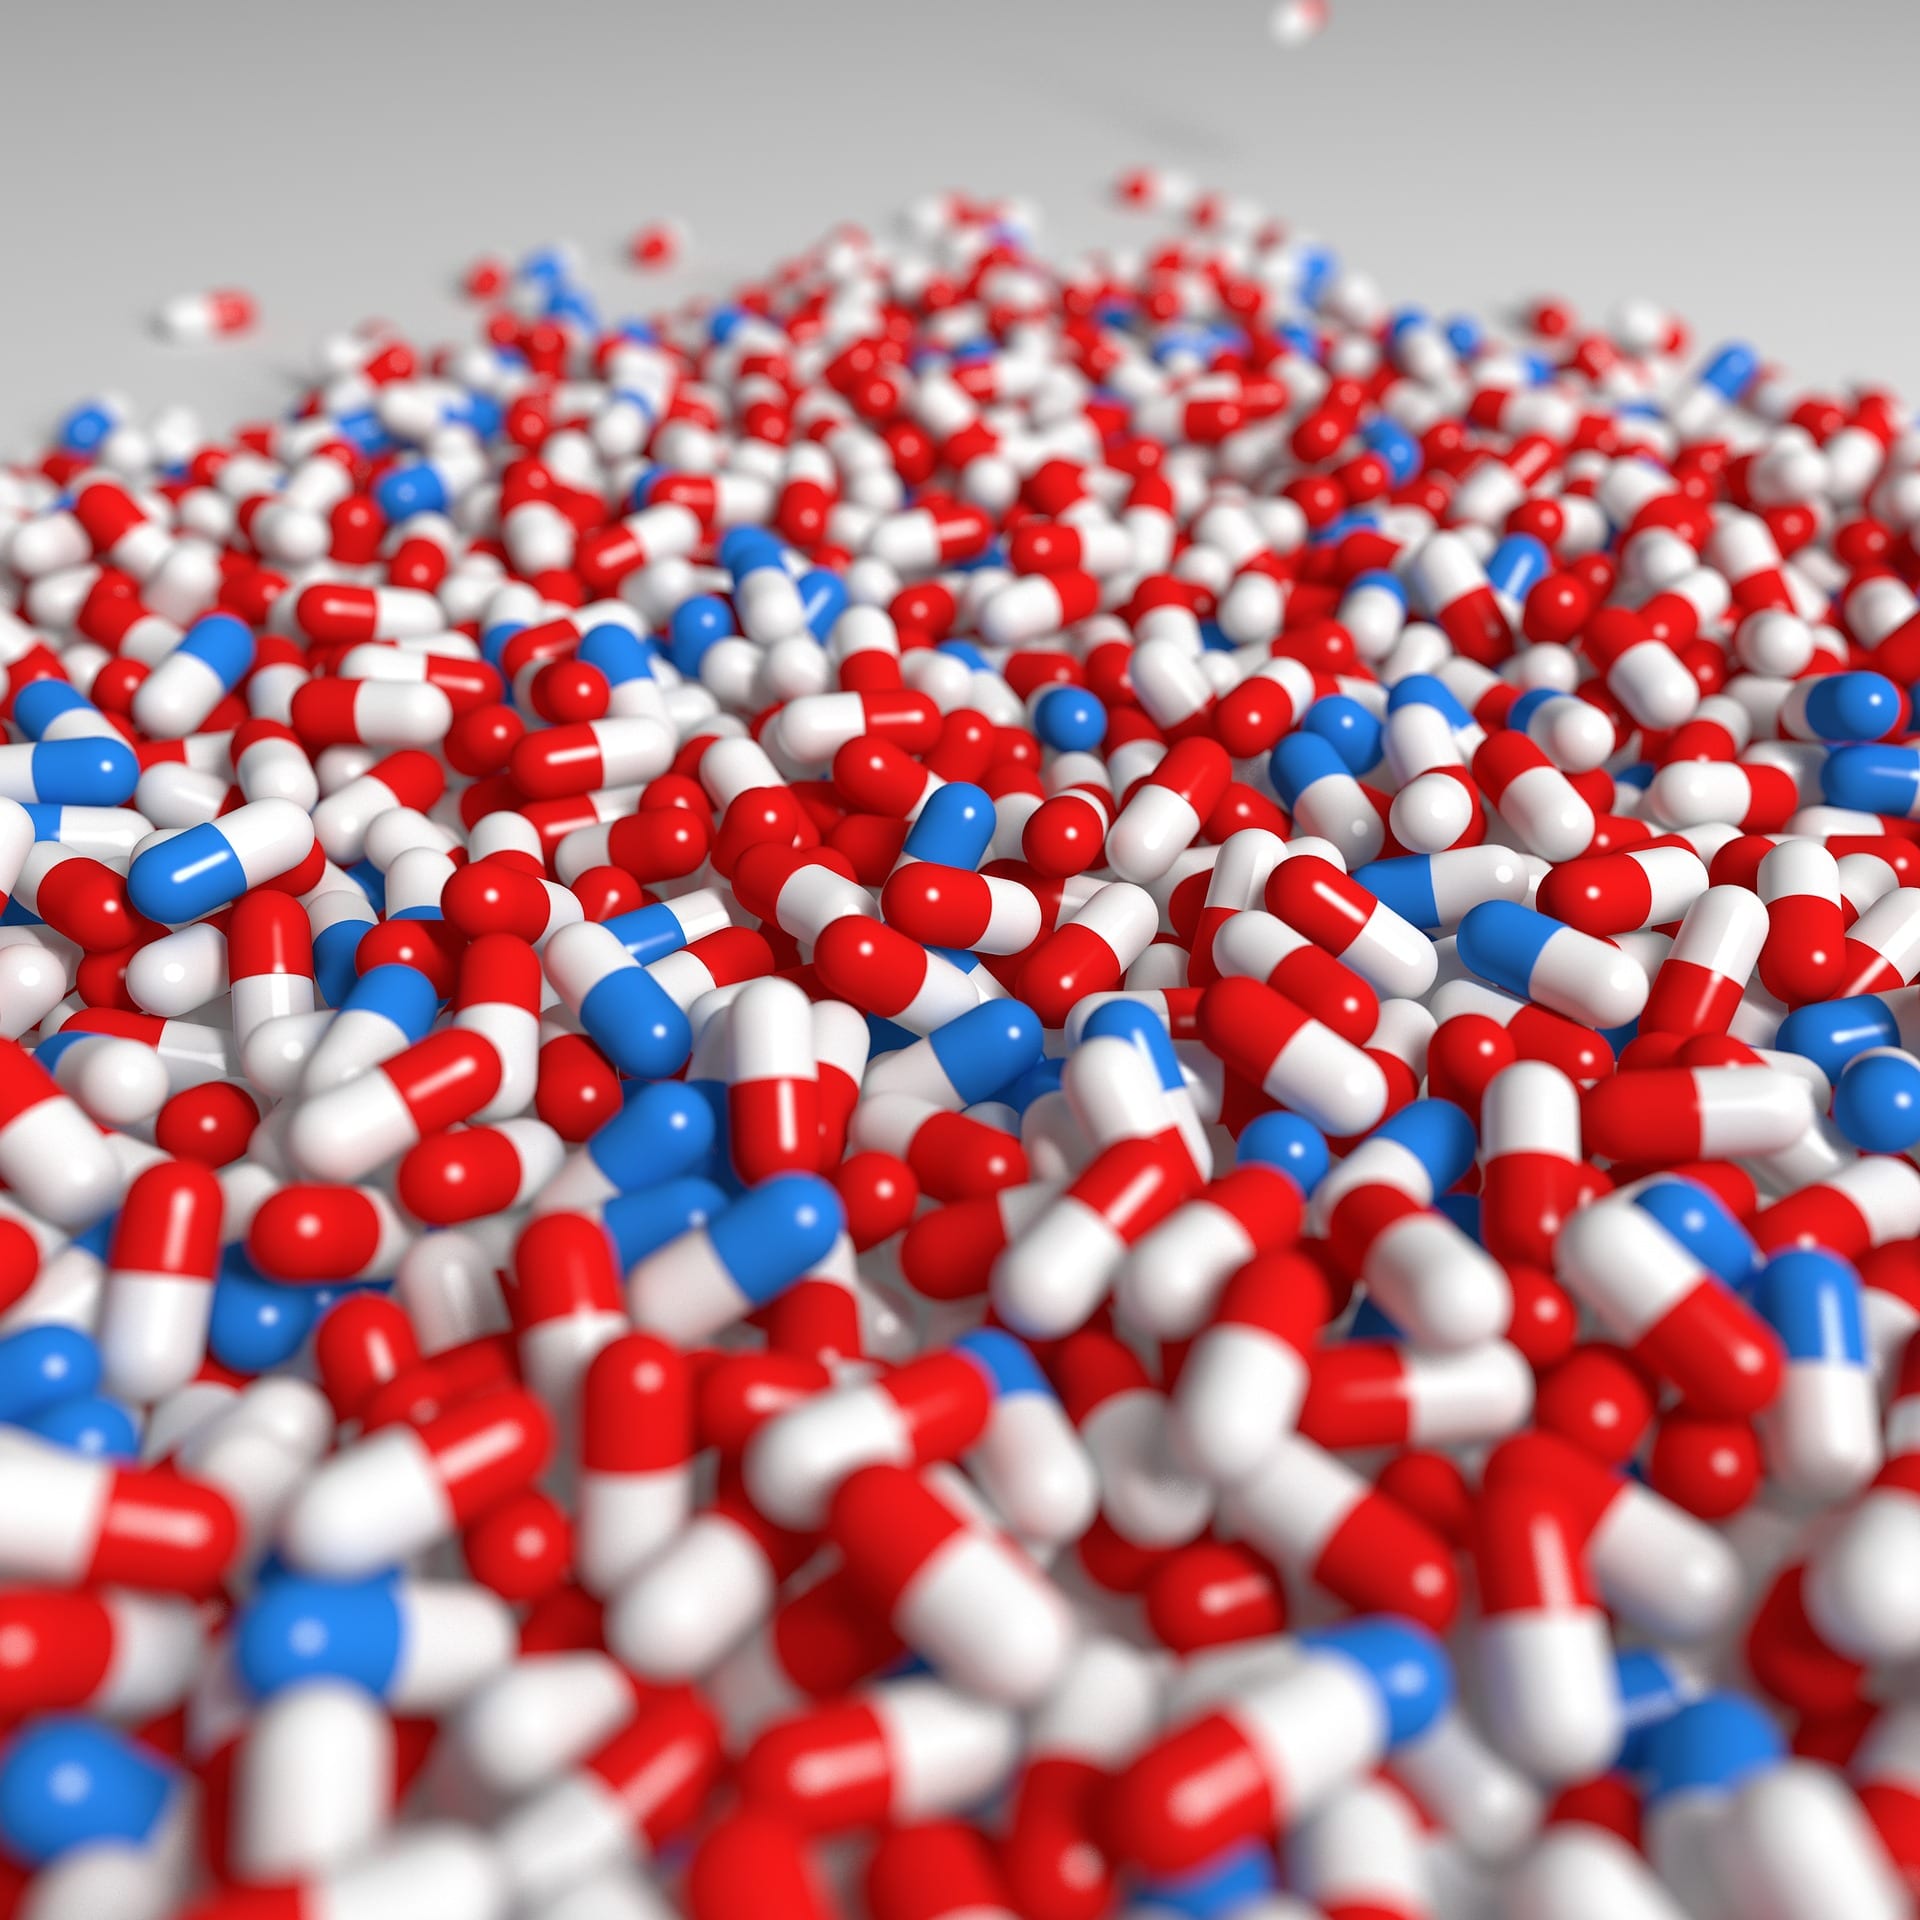 Red/white and blue/white capsules; image by mmmCCC, via Pixabay.com.